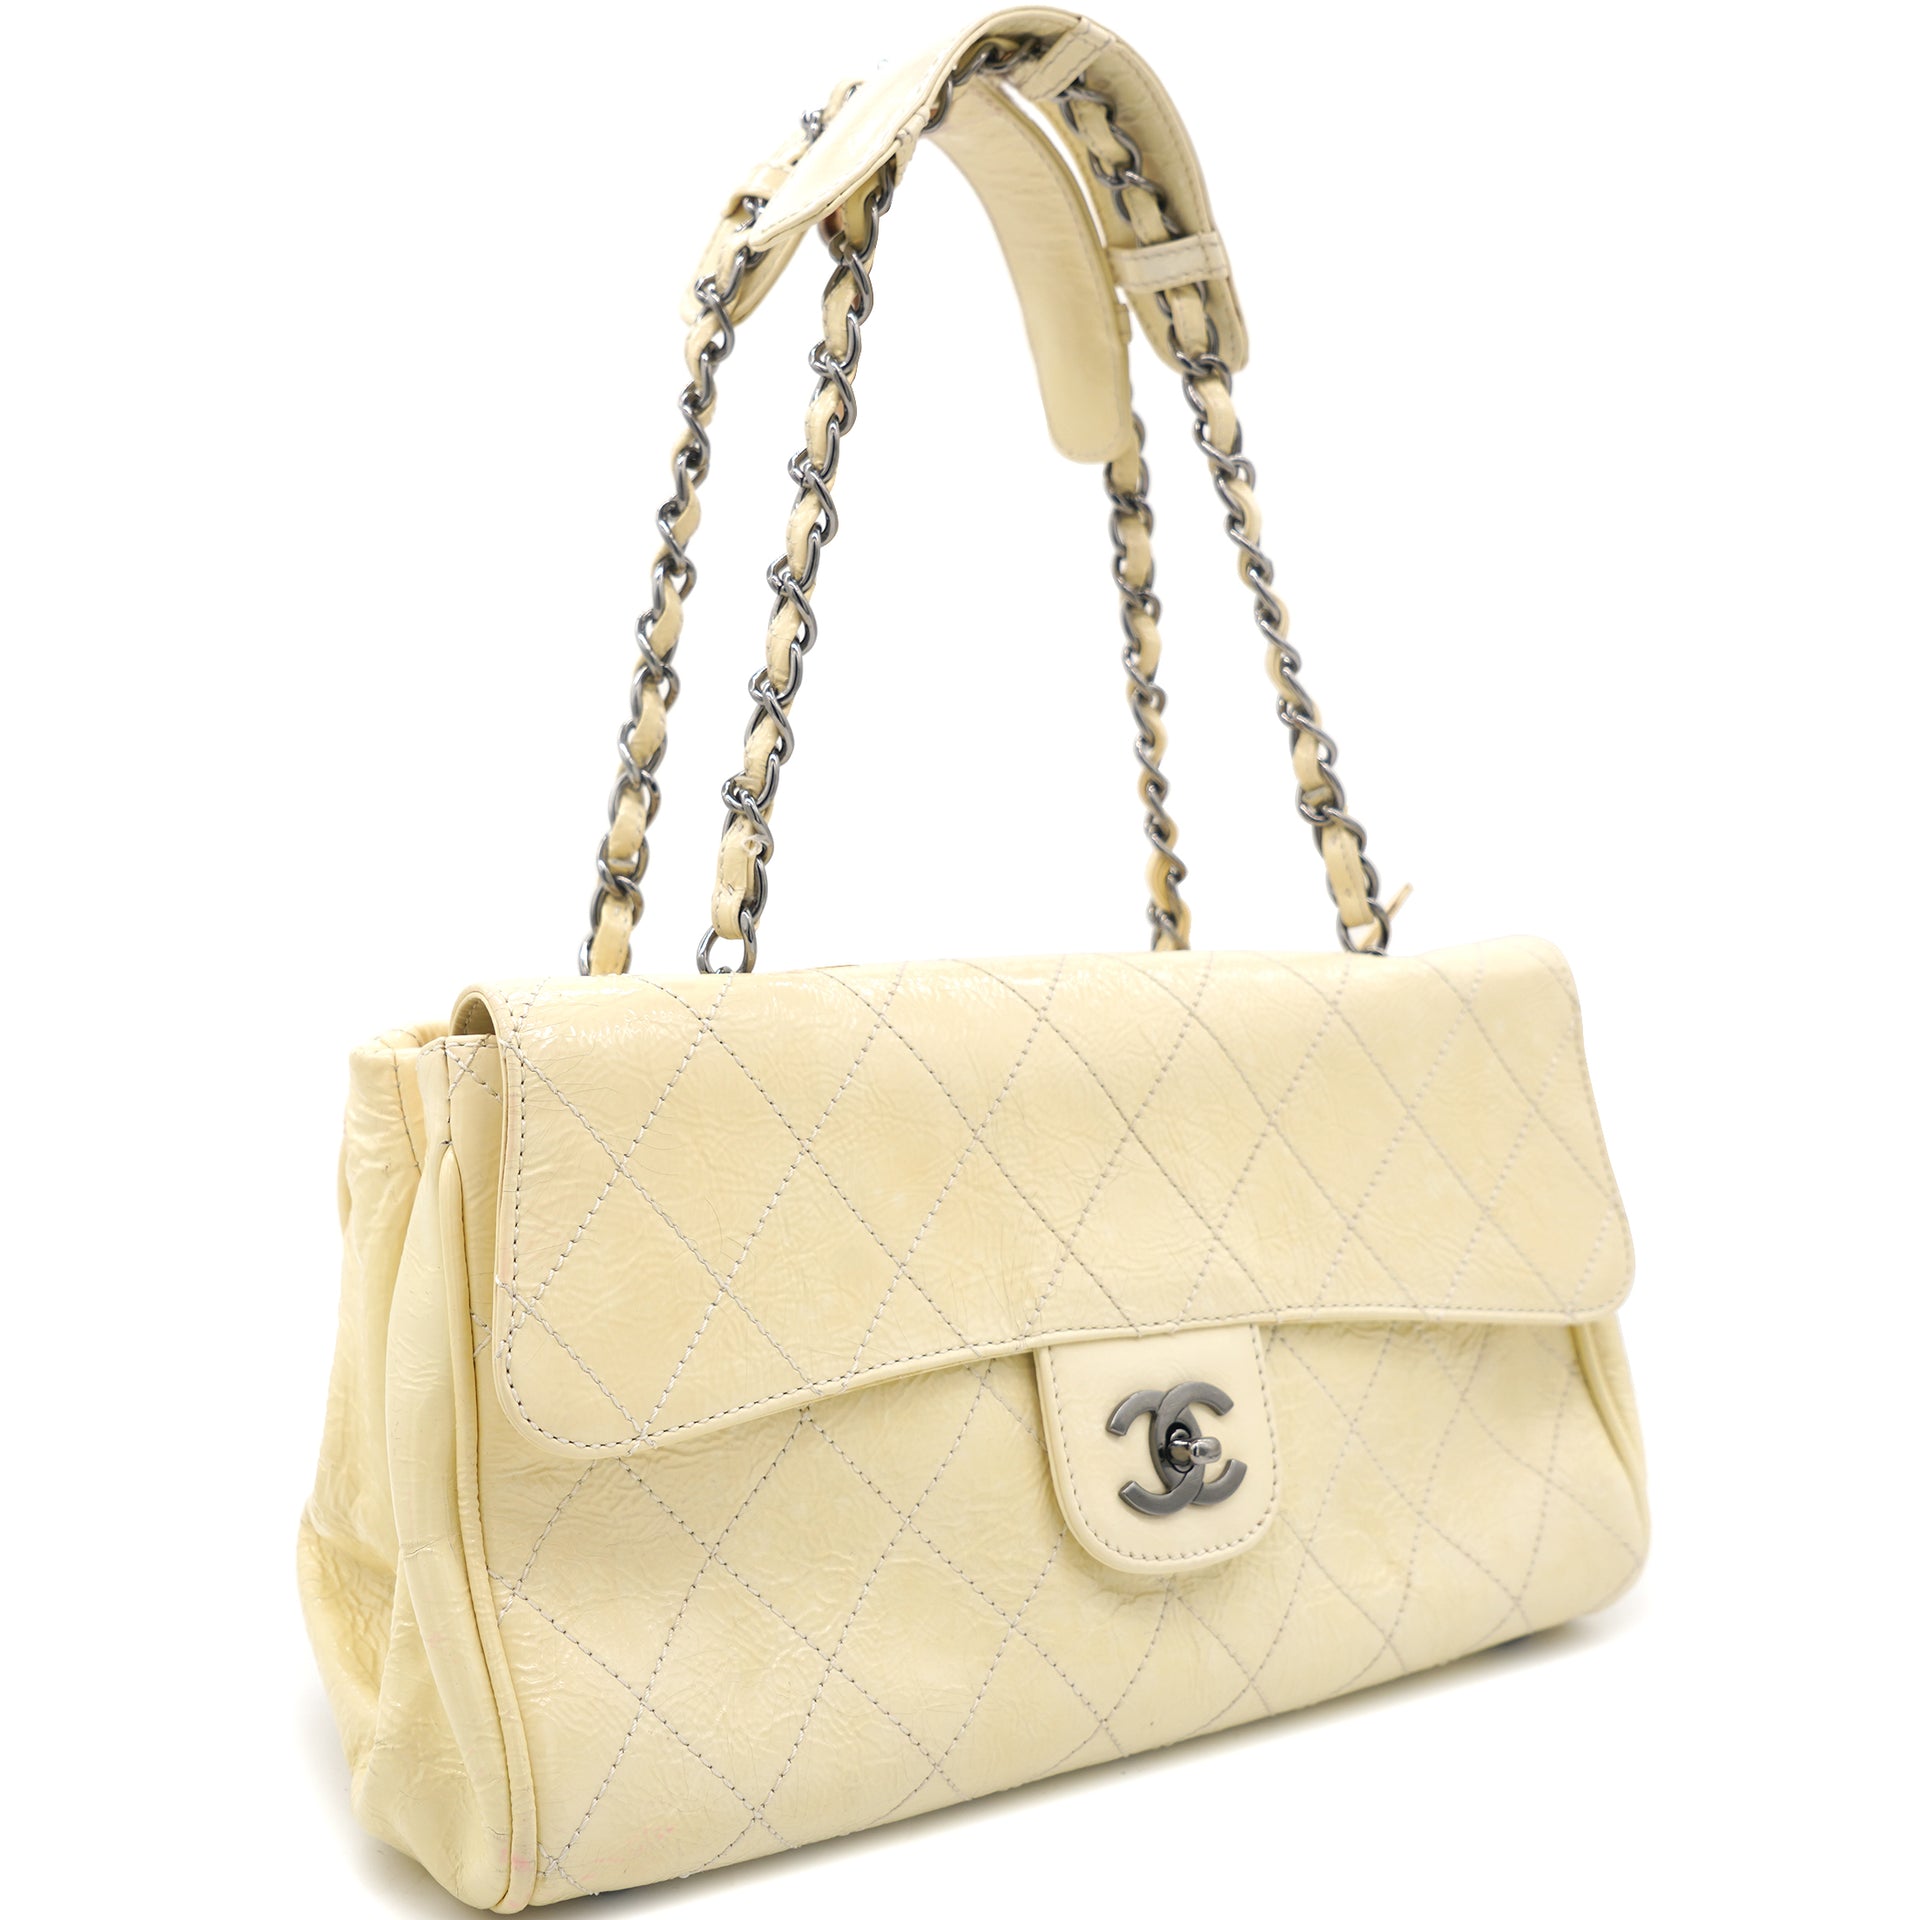 Chanel Caviar Quilted Small Double Flap Yellow